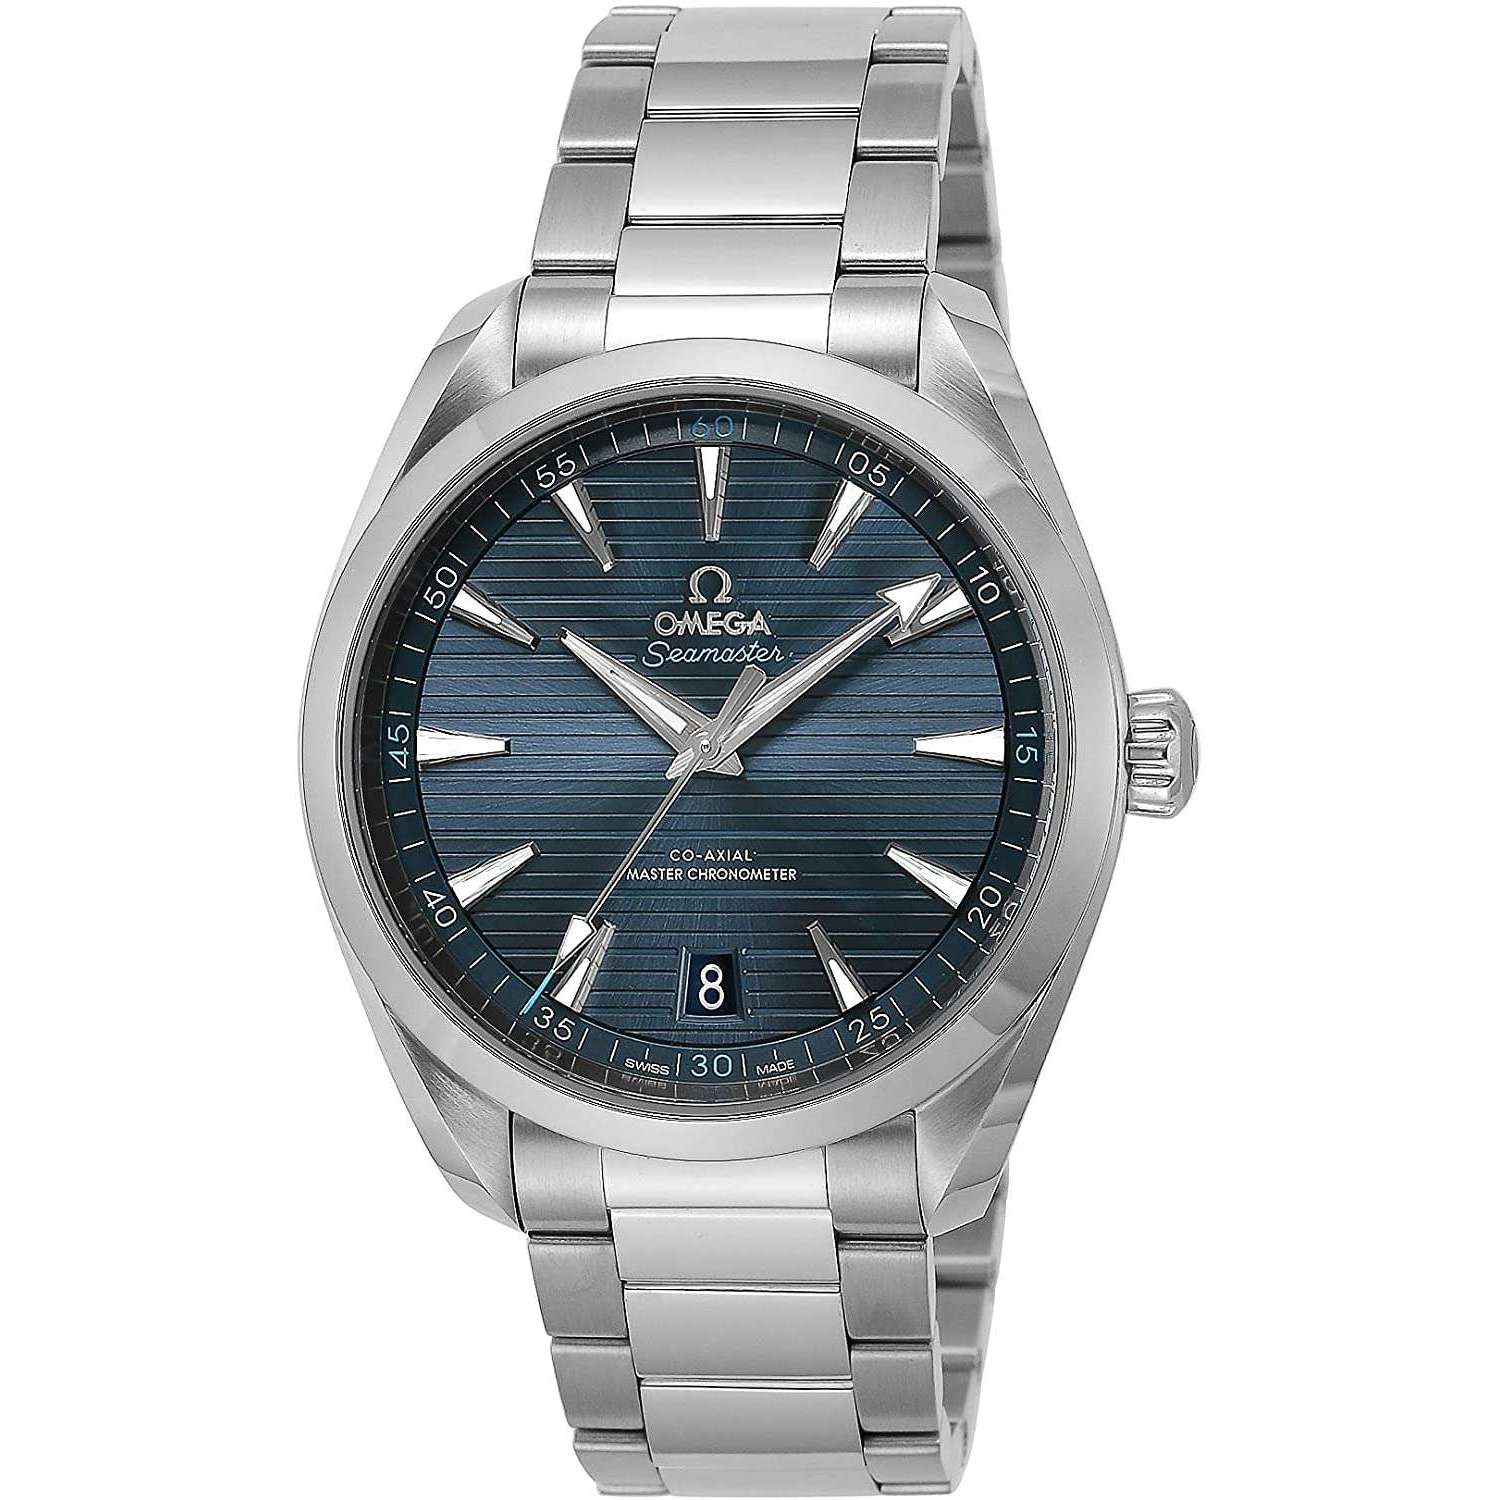 ROOK JAPAN:OMEGA SEAMASTER CO-AXIAL CHRONOMETER 40 MM MEN WATCH 220.10.41.21.03.001,Luxury Watch,Omega